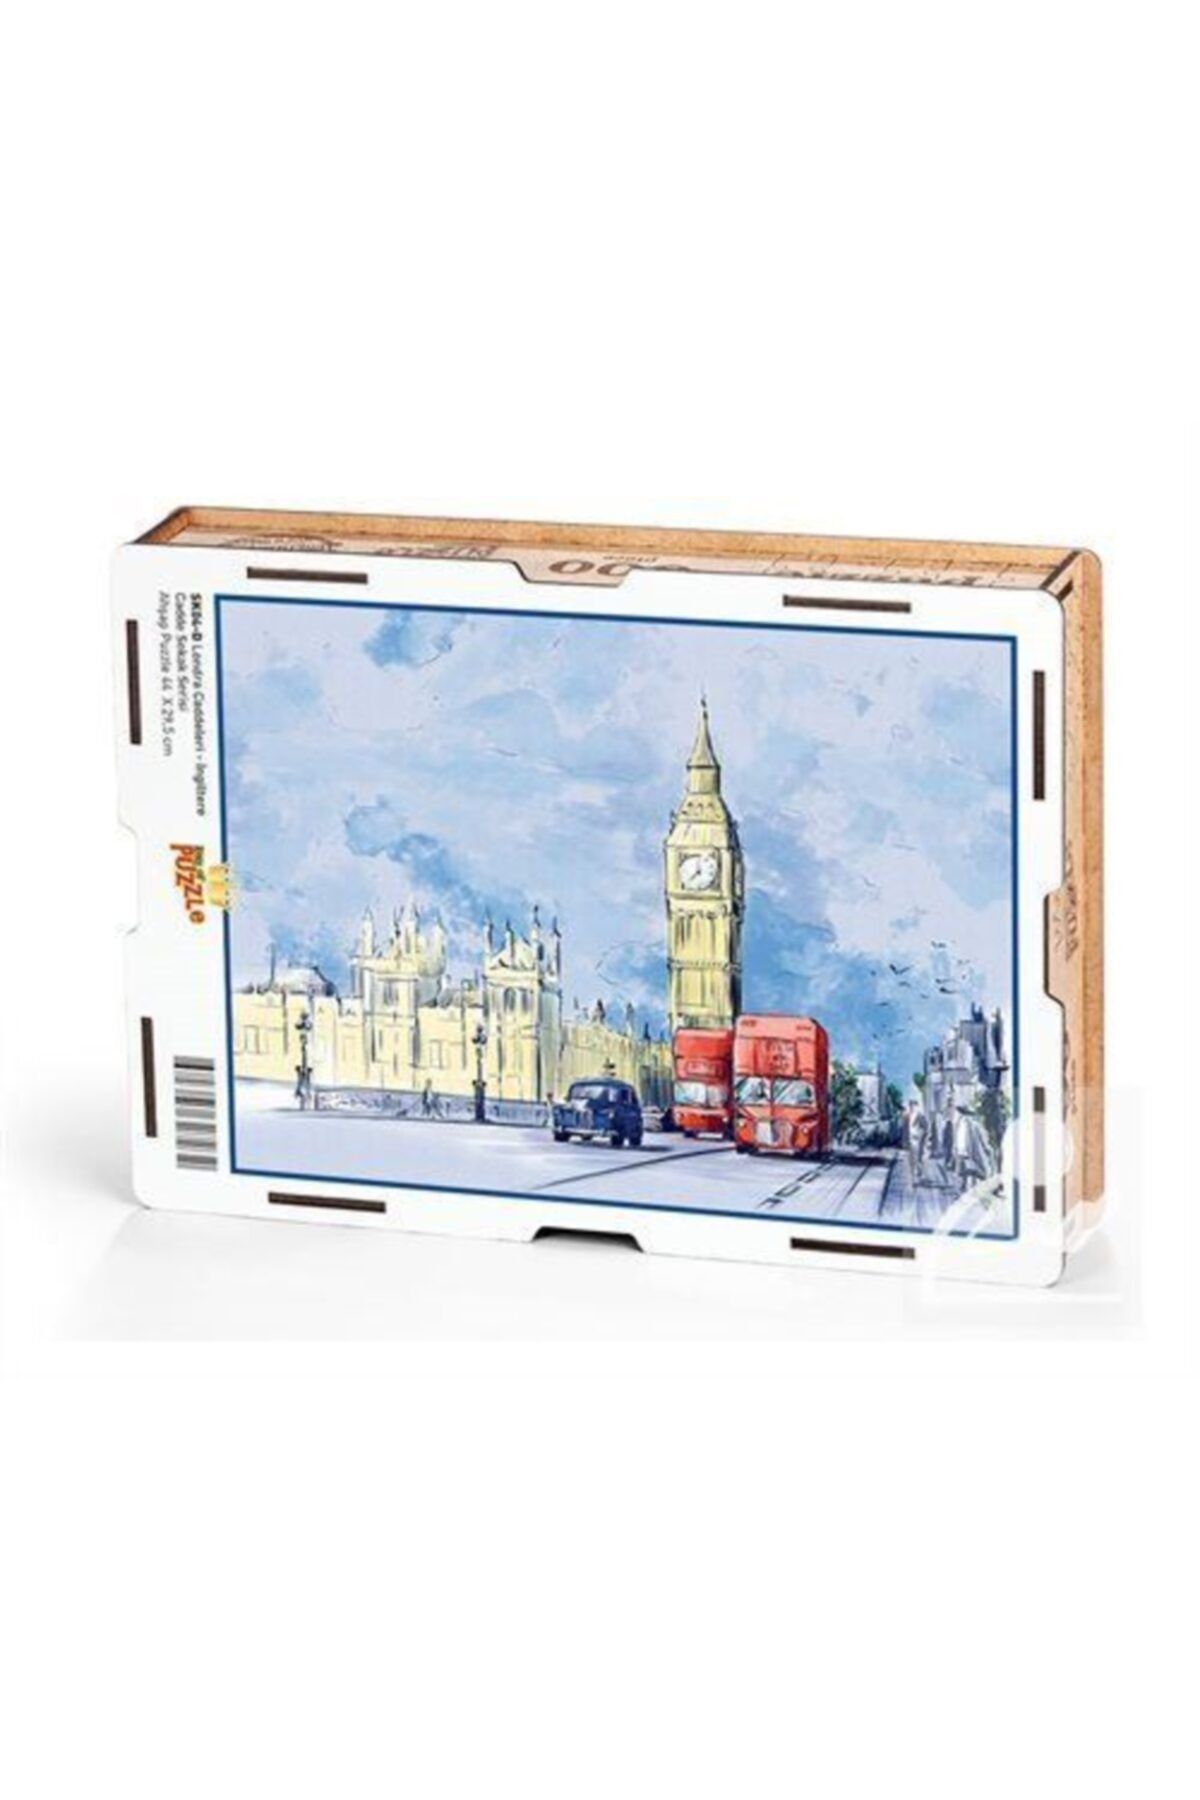 King Of Puzzle Streets of London - England Wooden Puzzle 500 Pieces (sk04-d) 450621